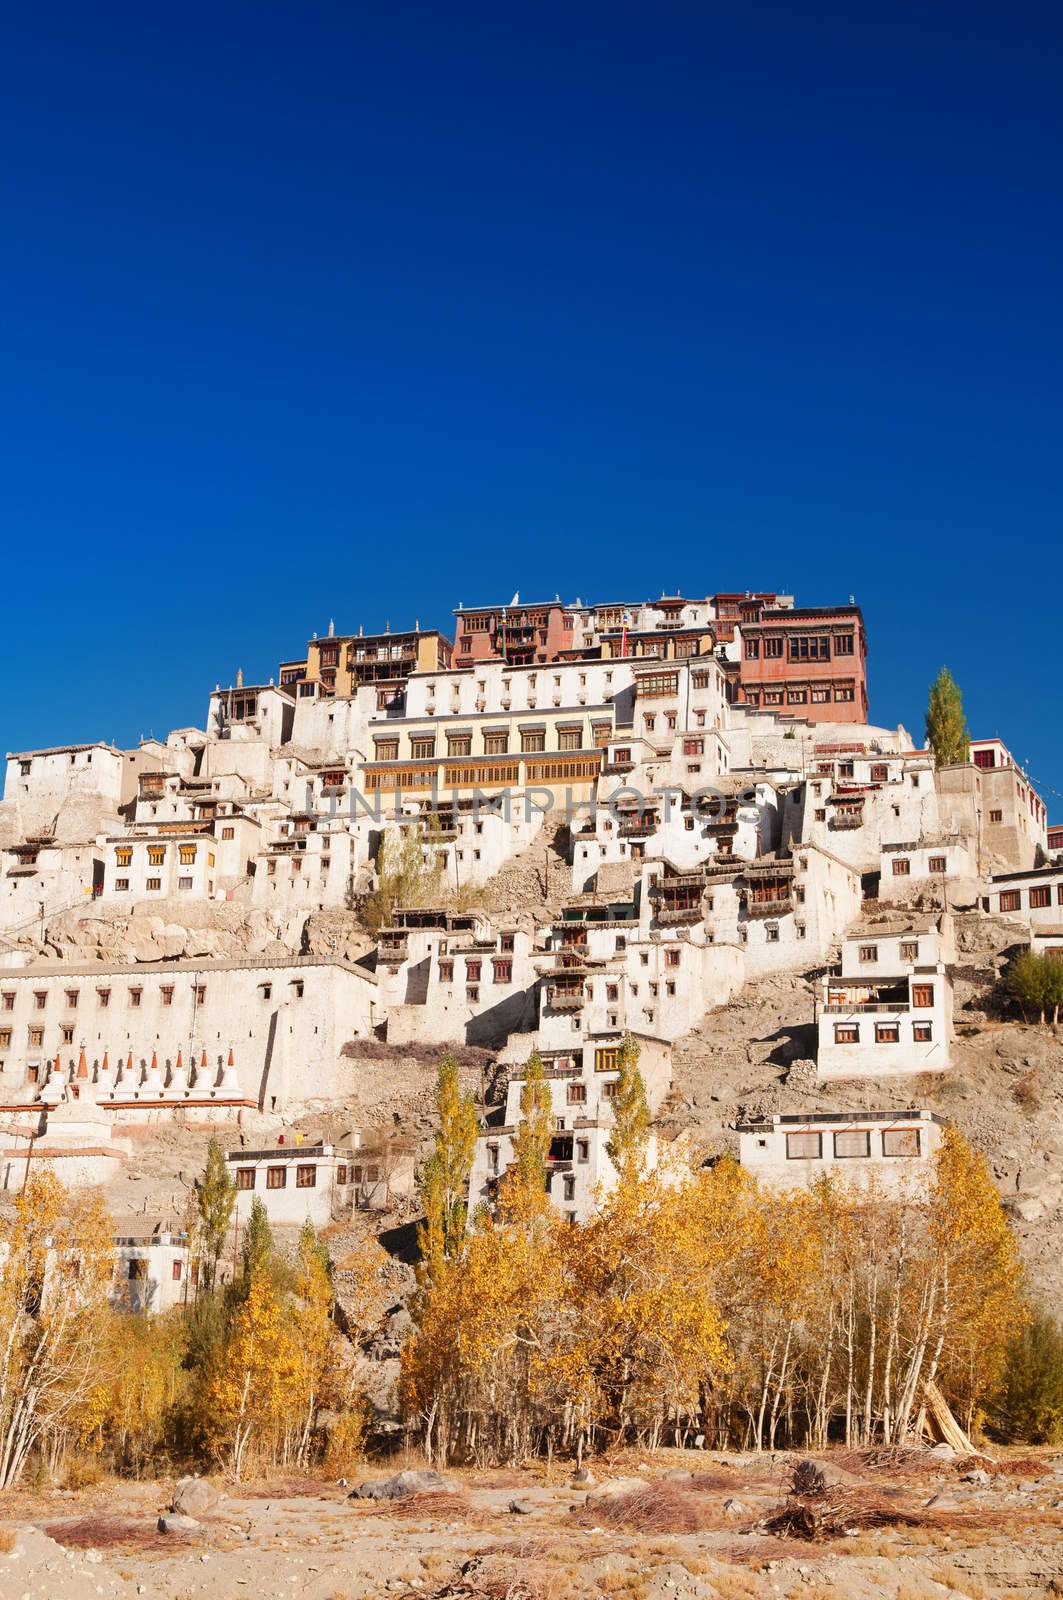 Thiksey Monastery in Leh Ladakh, Northern India.